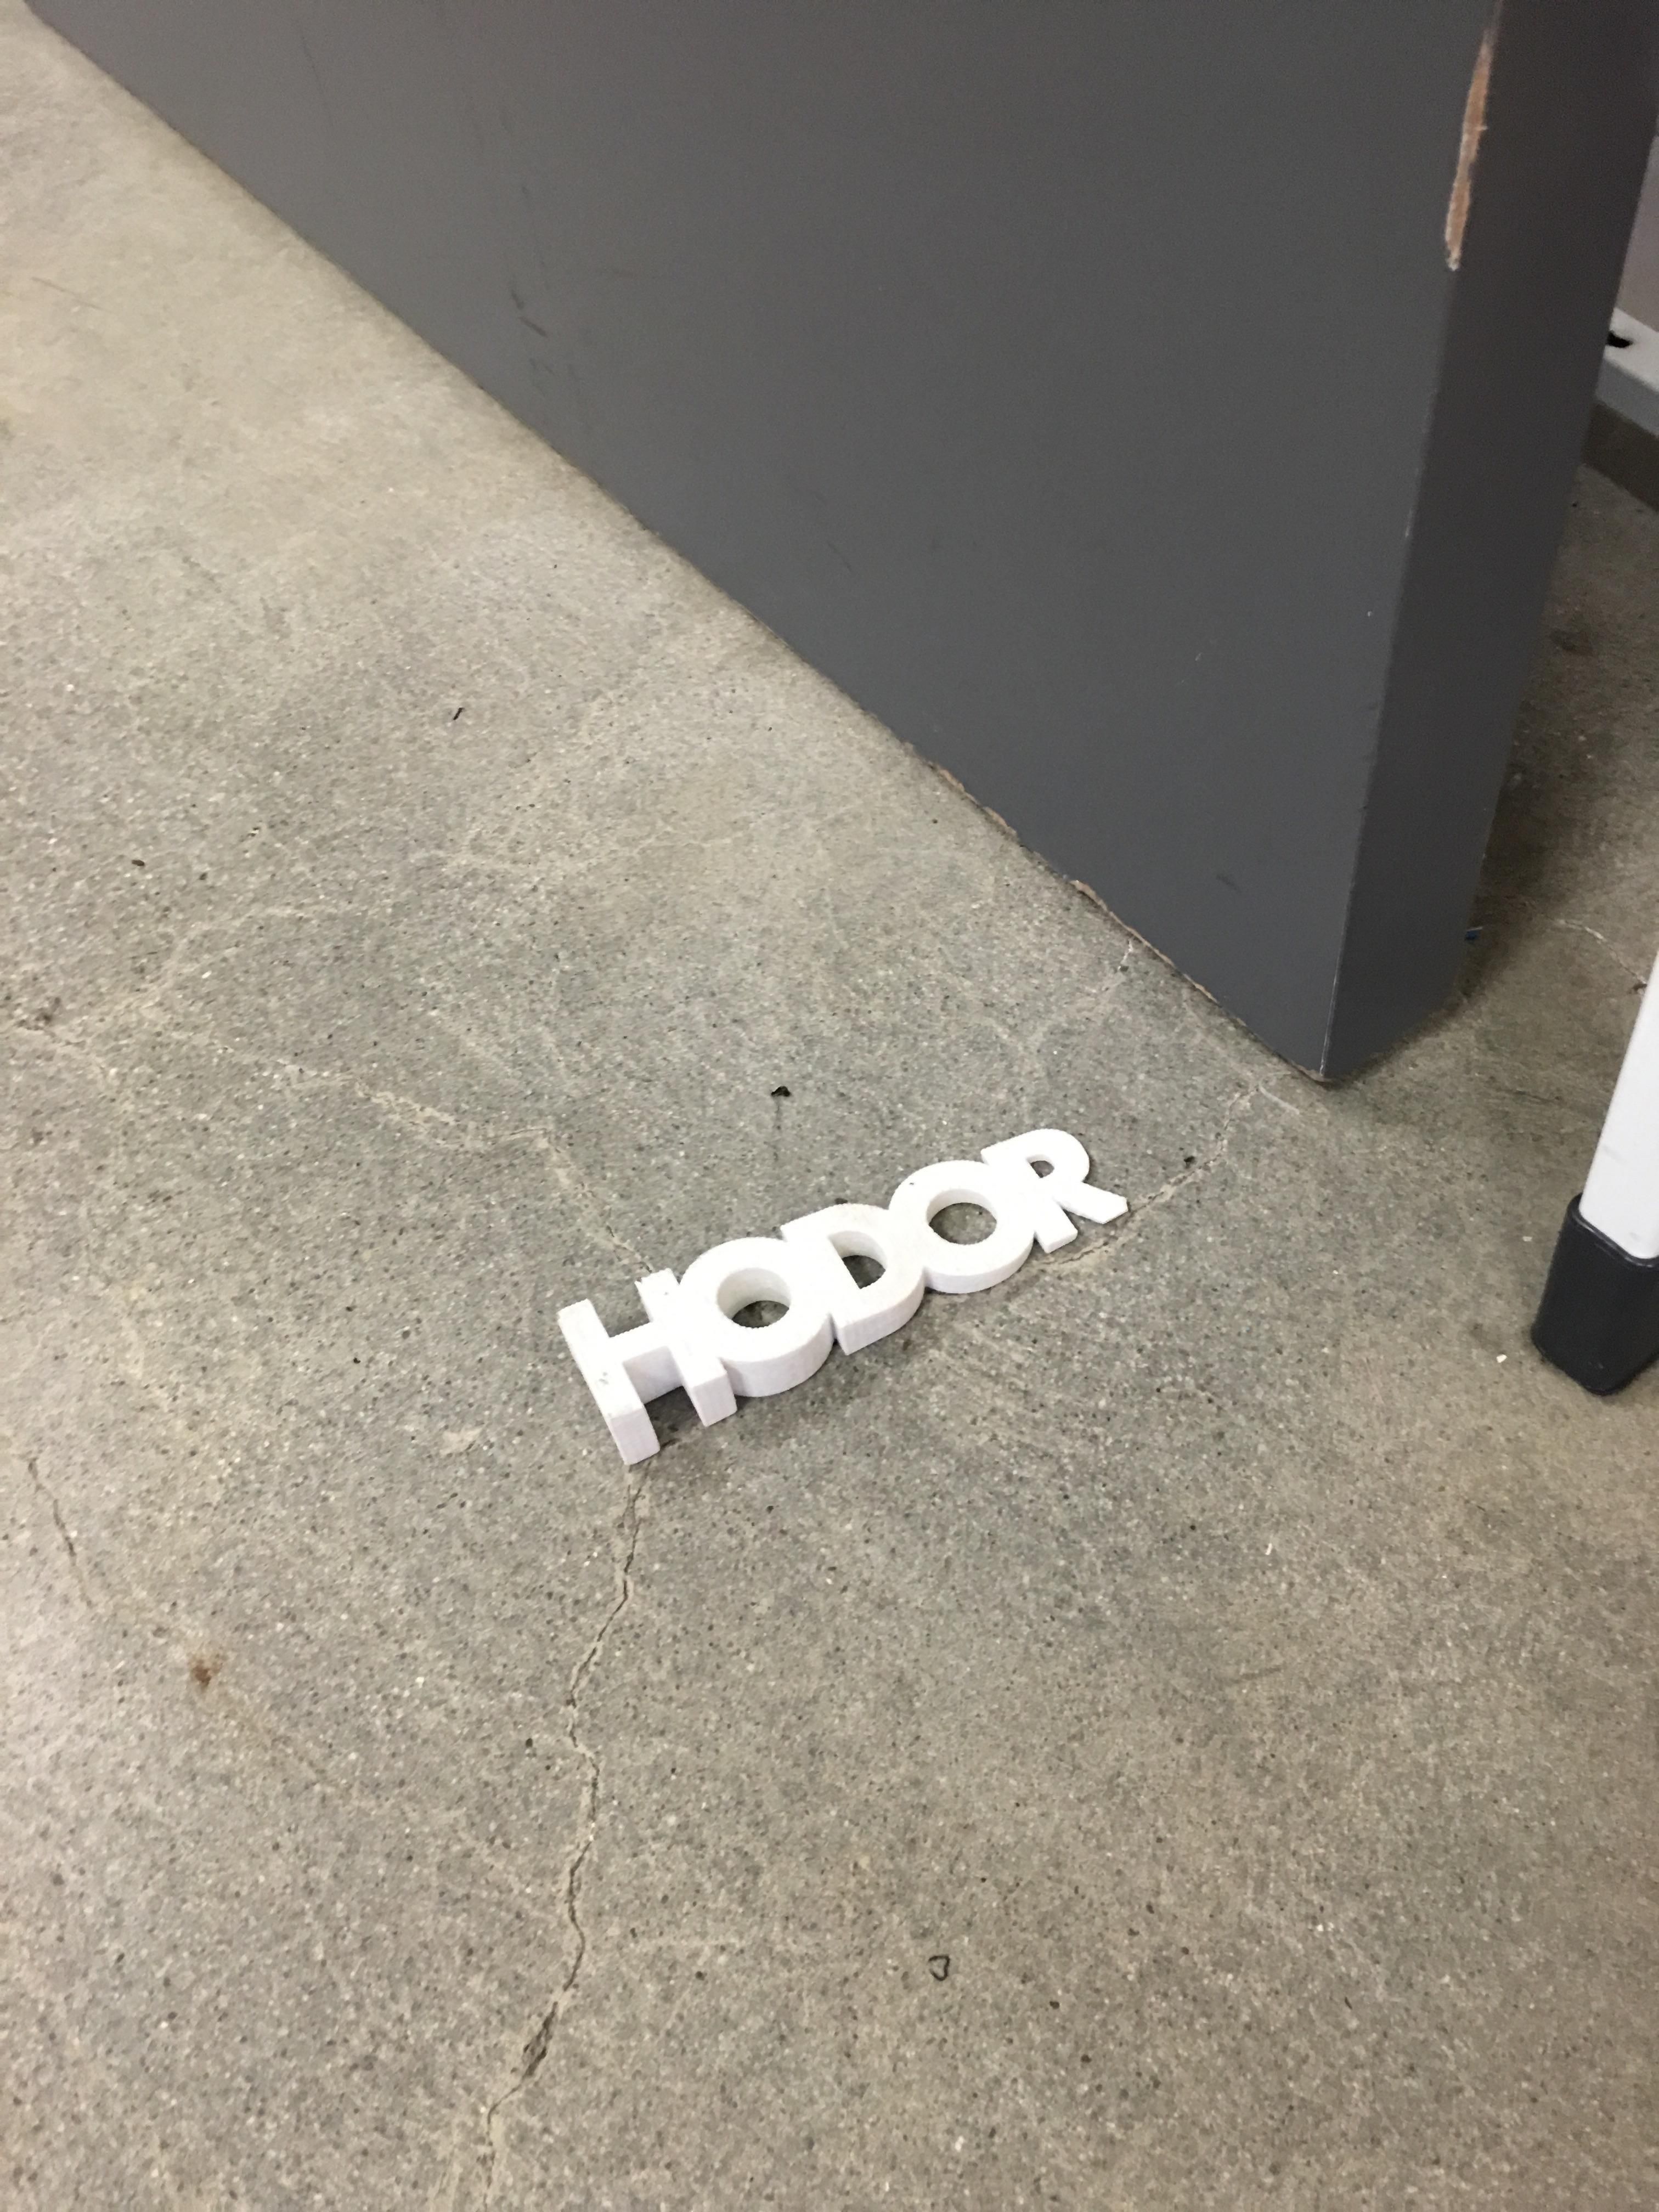 Spotted this amazing door stop at work